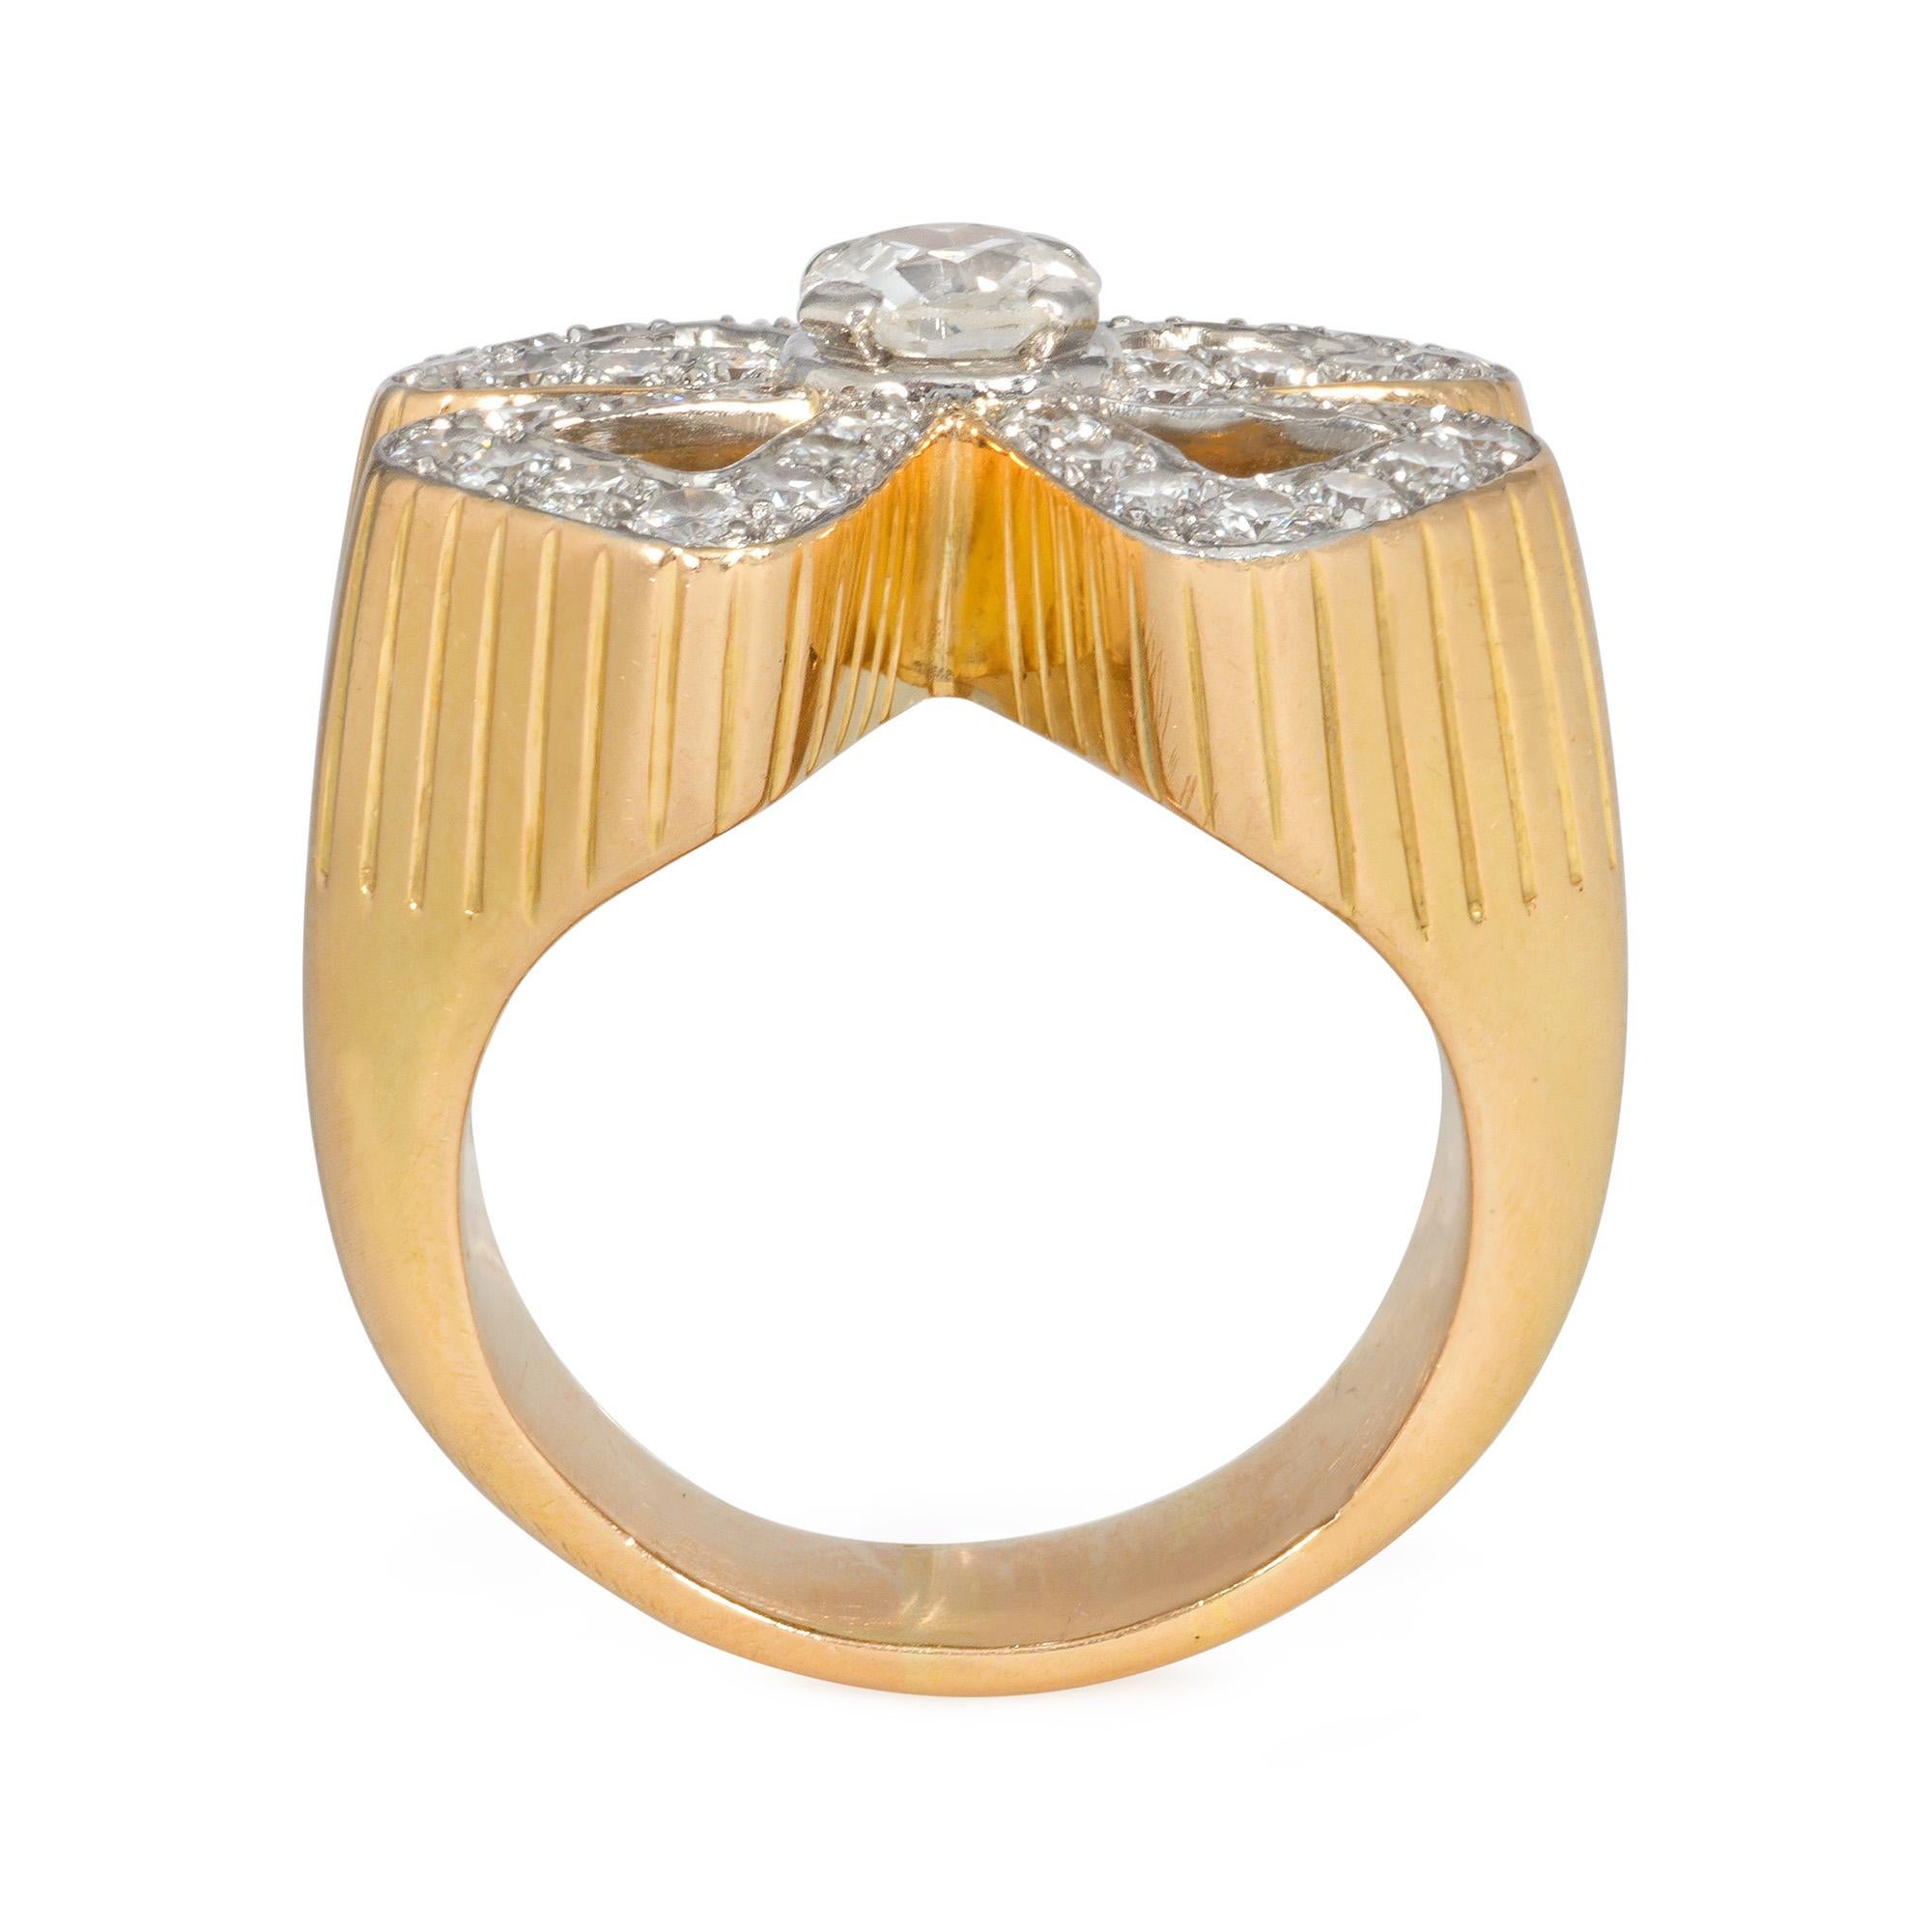 Modernist French Mid-Century Diamond and Gold Cocktail Ring of Four-Leaf Clover Design For Sale